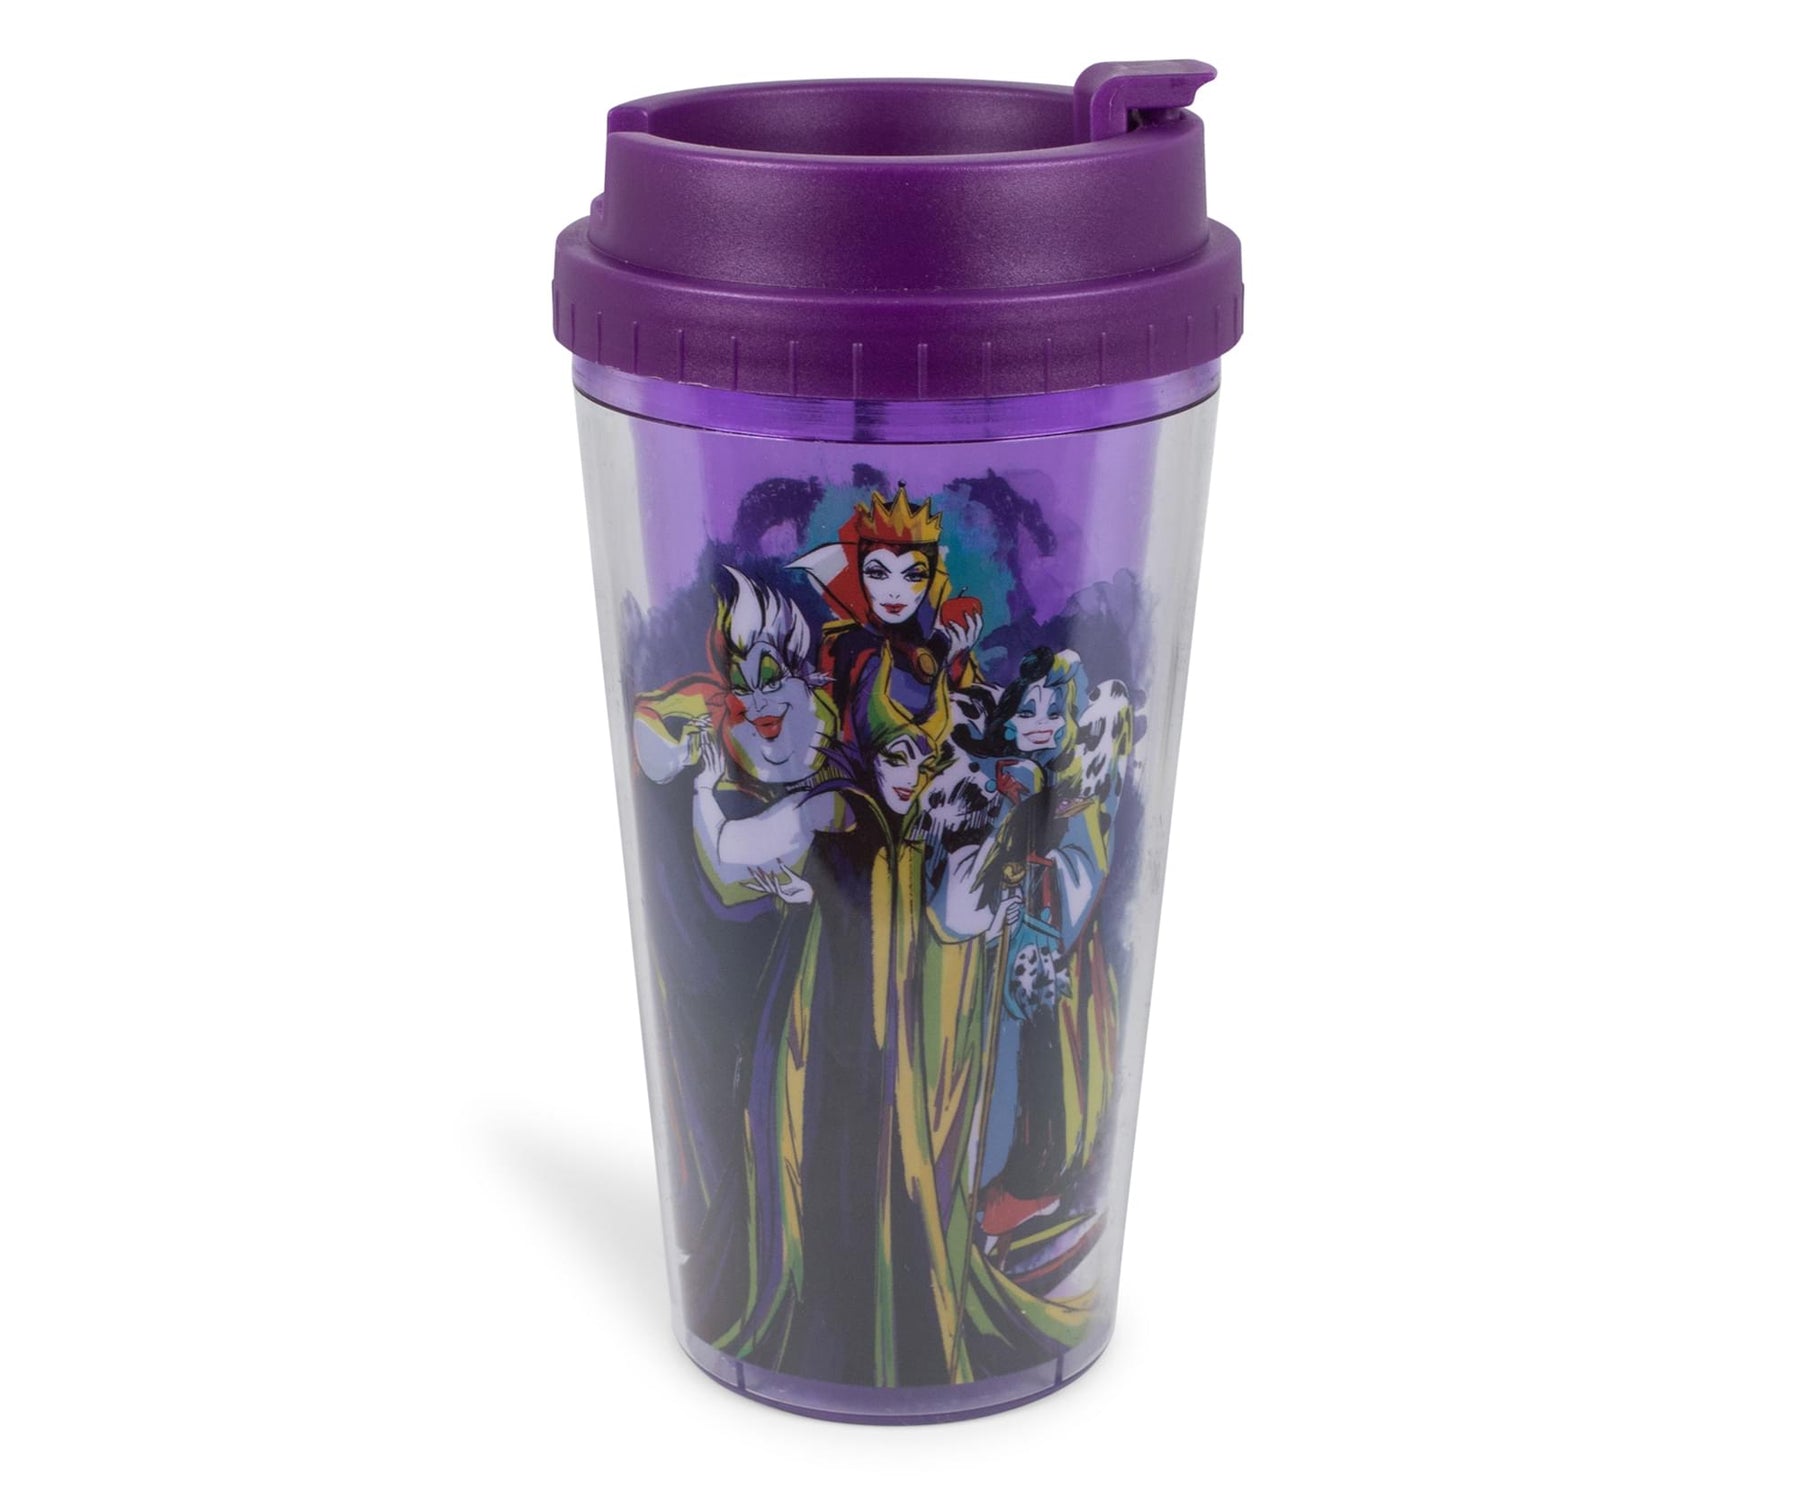 Disney Villains "Bad Vibes Only" Double-Walled Plastic Tumbler | Holds 16 Ounces